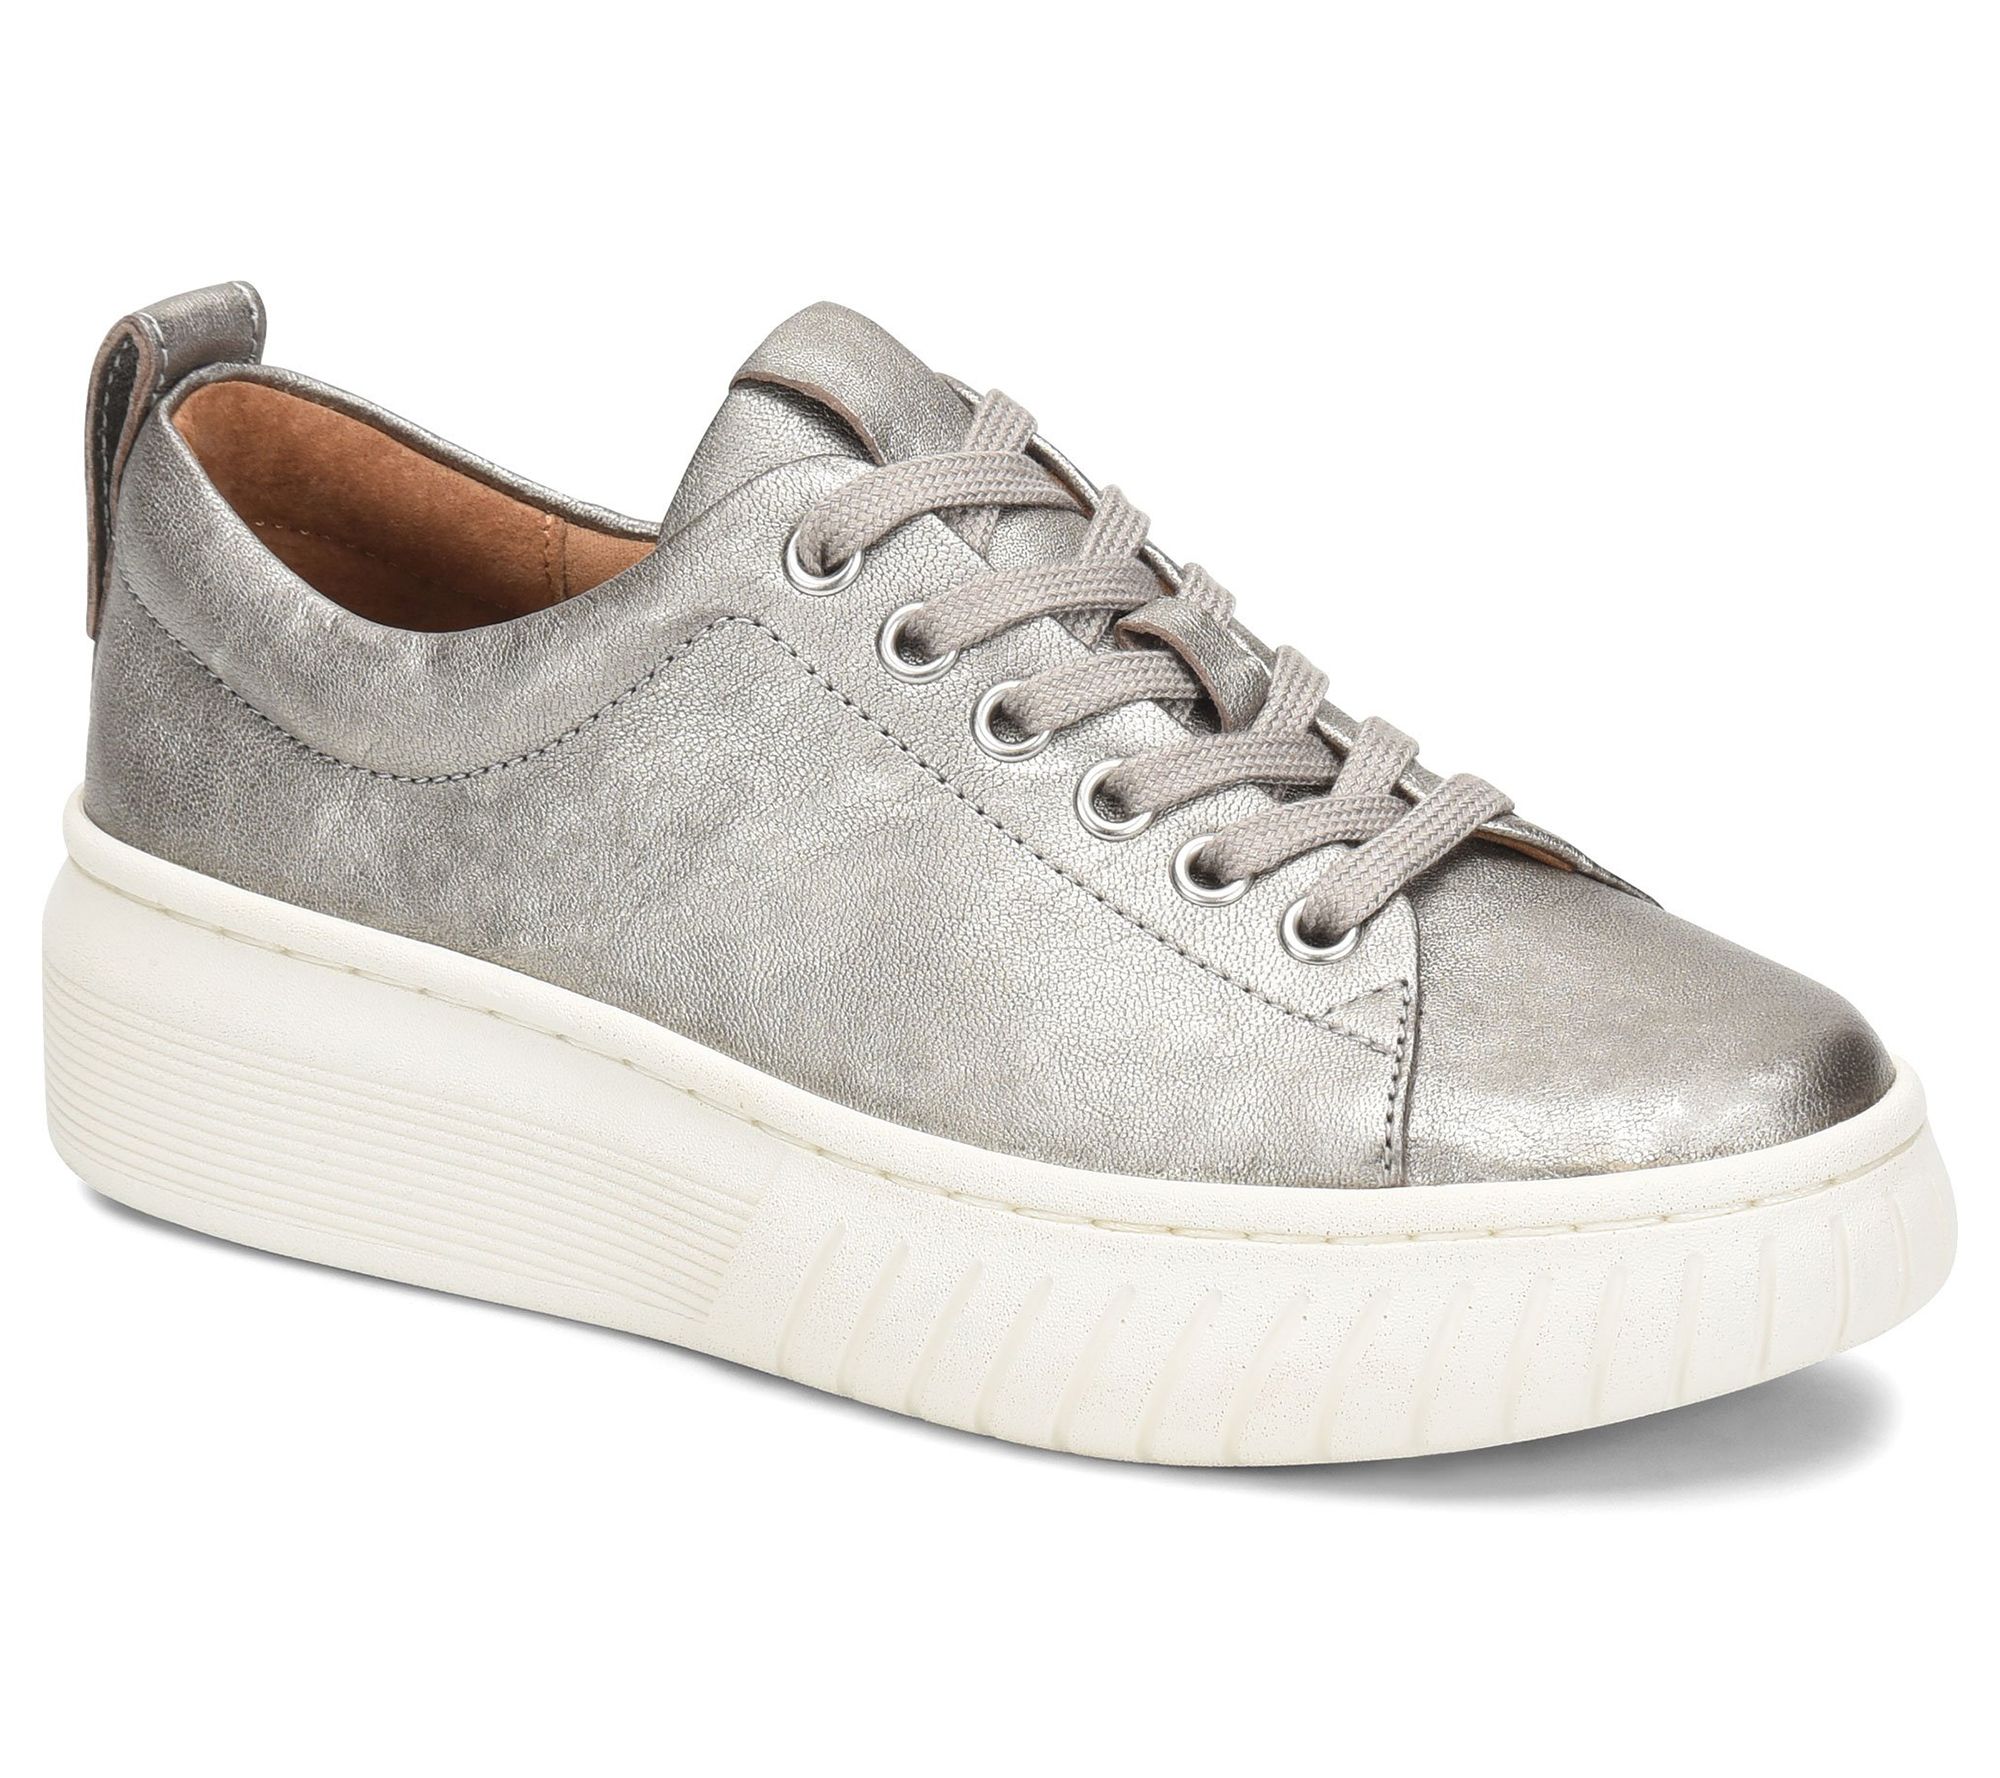 sofft sneakers on sale